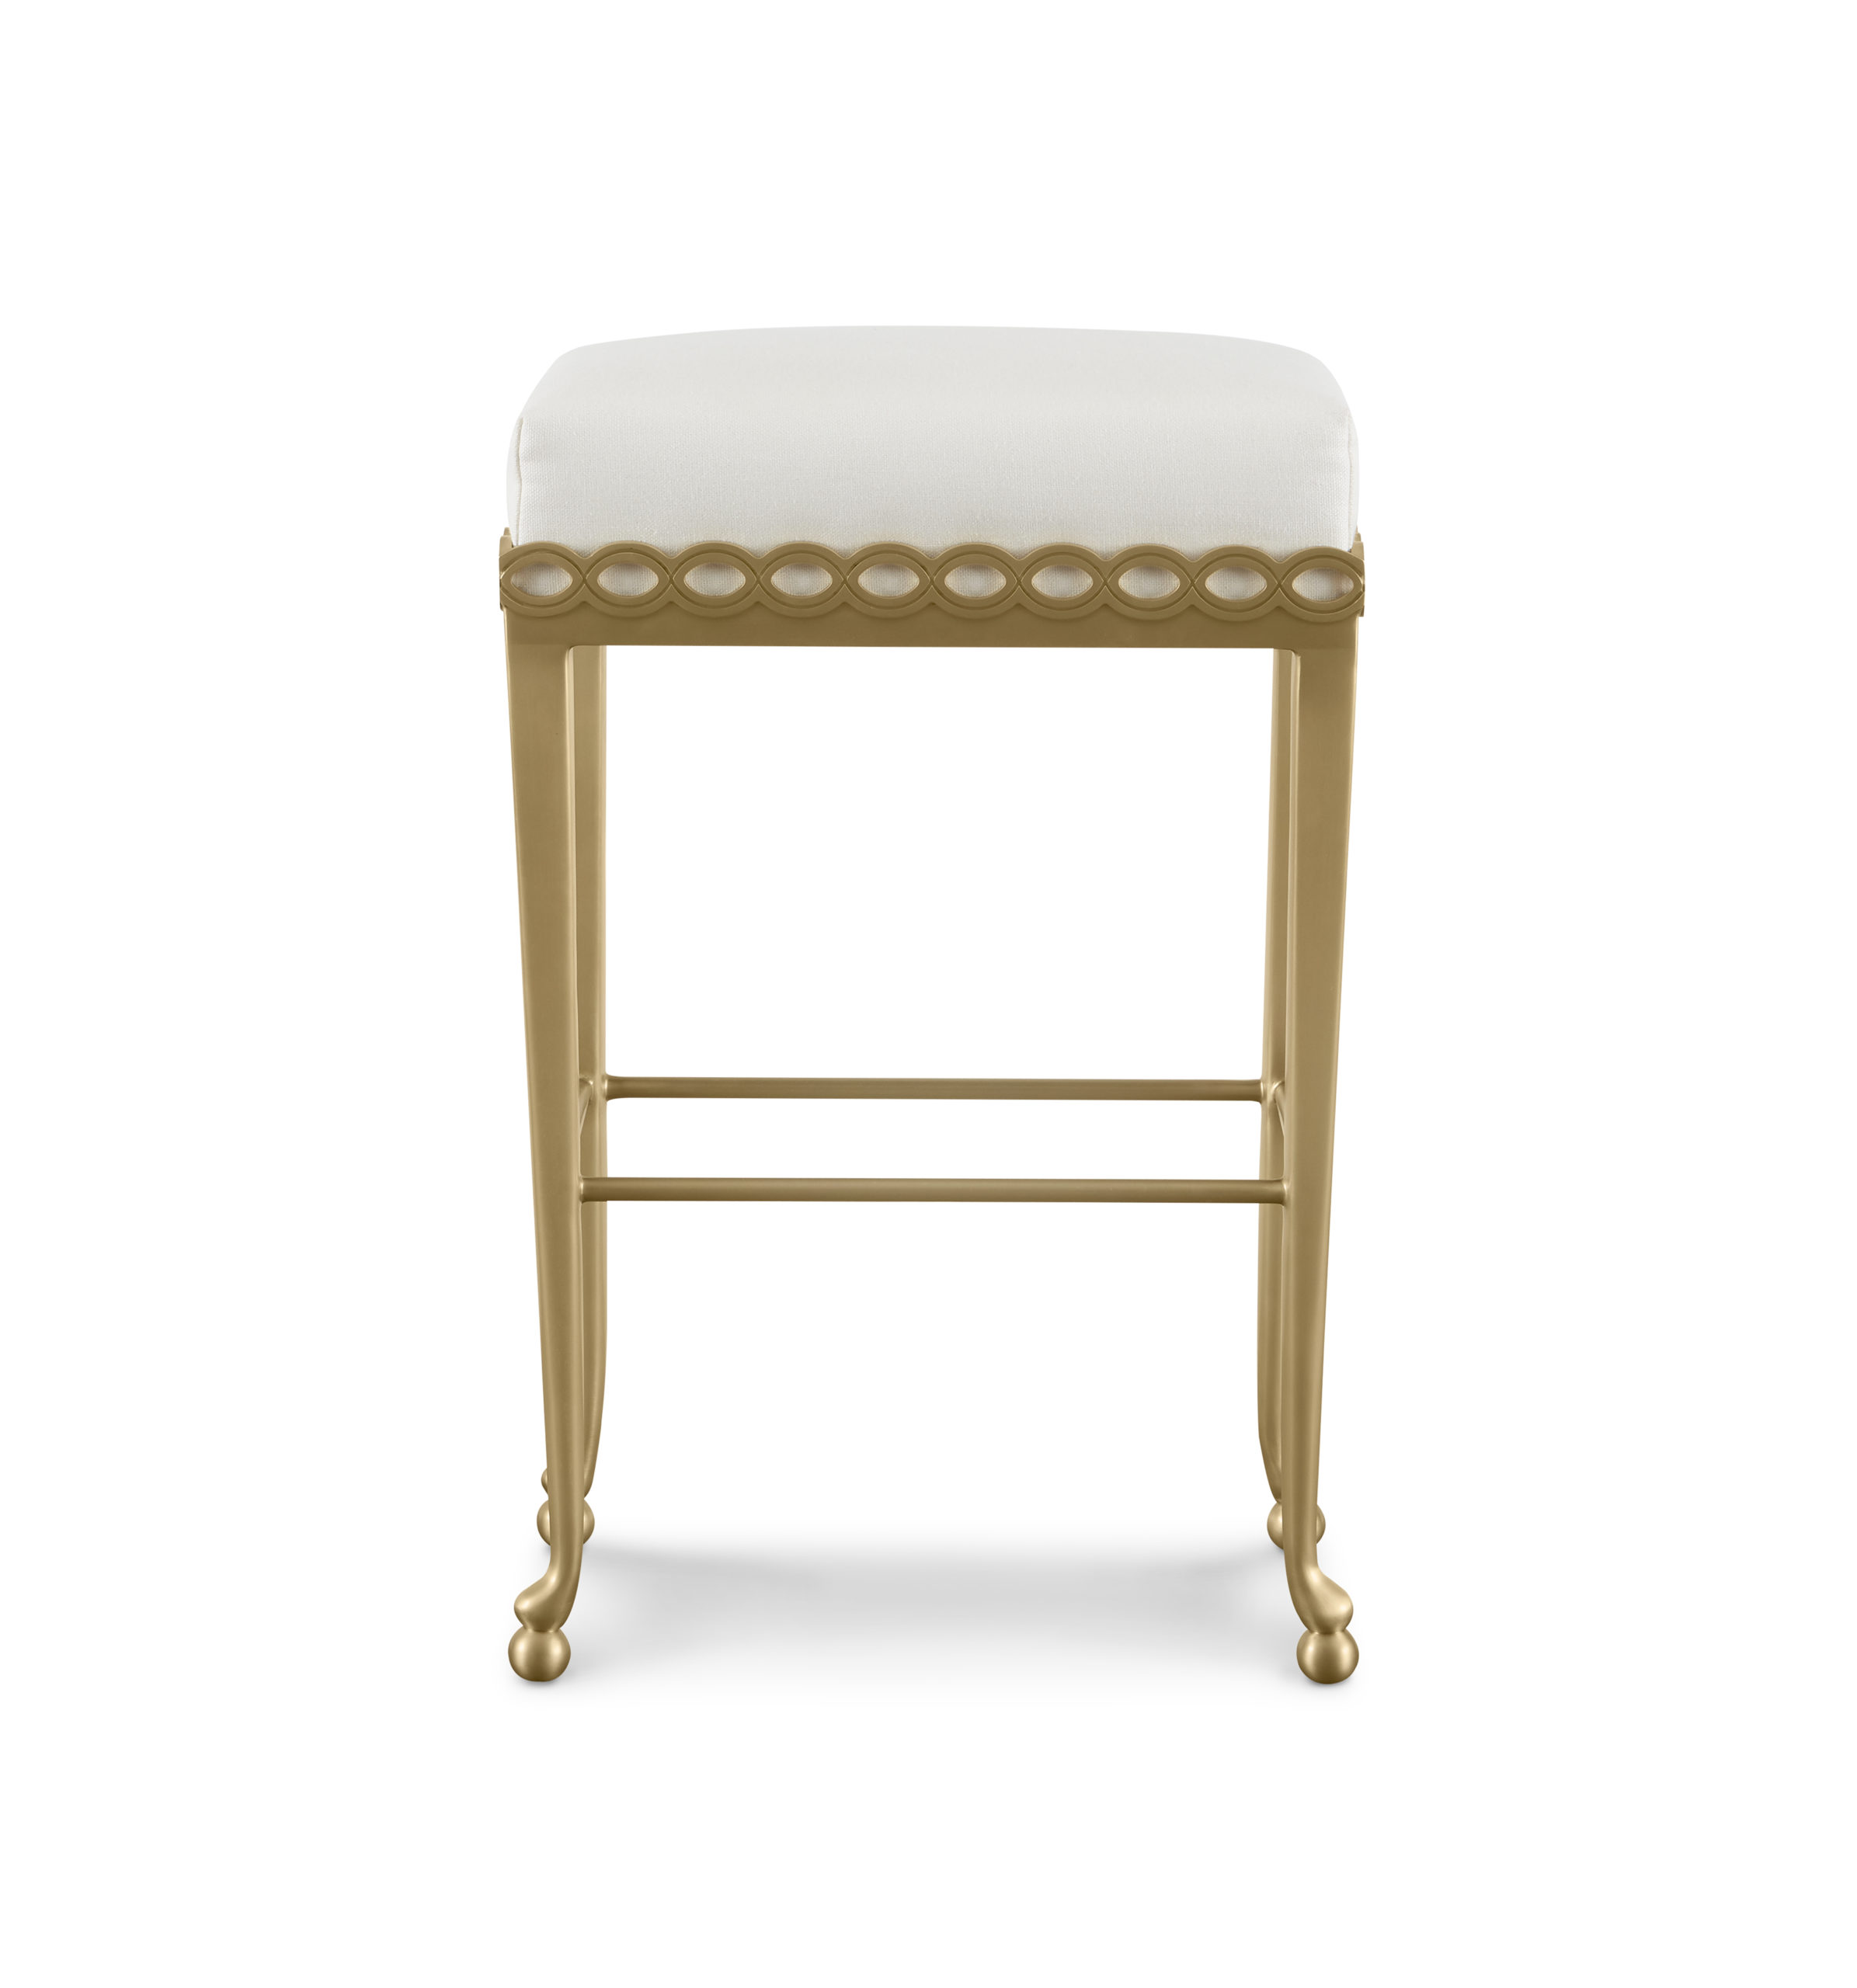 Baker_products_WNWN_infinity_barstool_BAA3249_FRONT-scaled-2